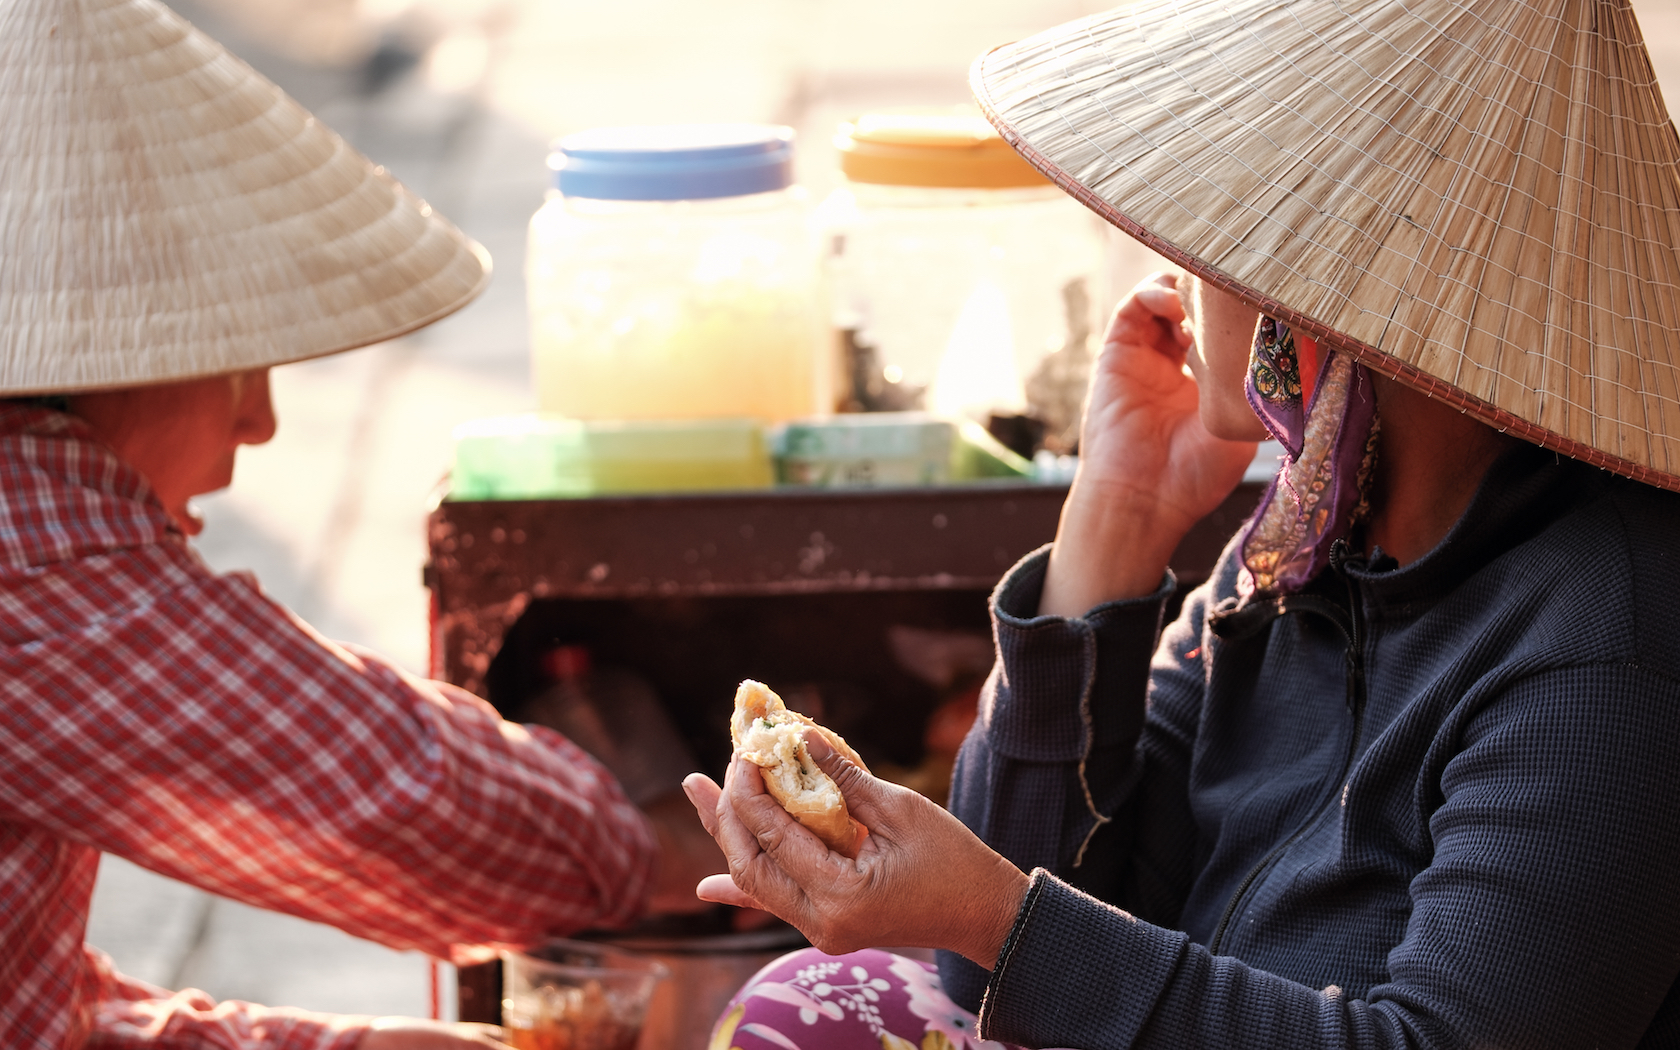 Local Vietnamese women eating baguette bread with vegetable and meat filling (called Banh My or Banh Mi in Vietnamese) - popular street food in Vietnam